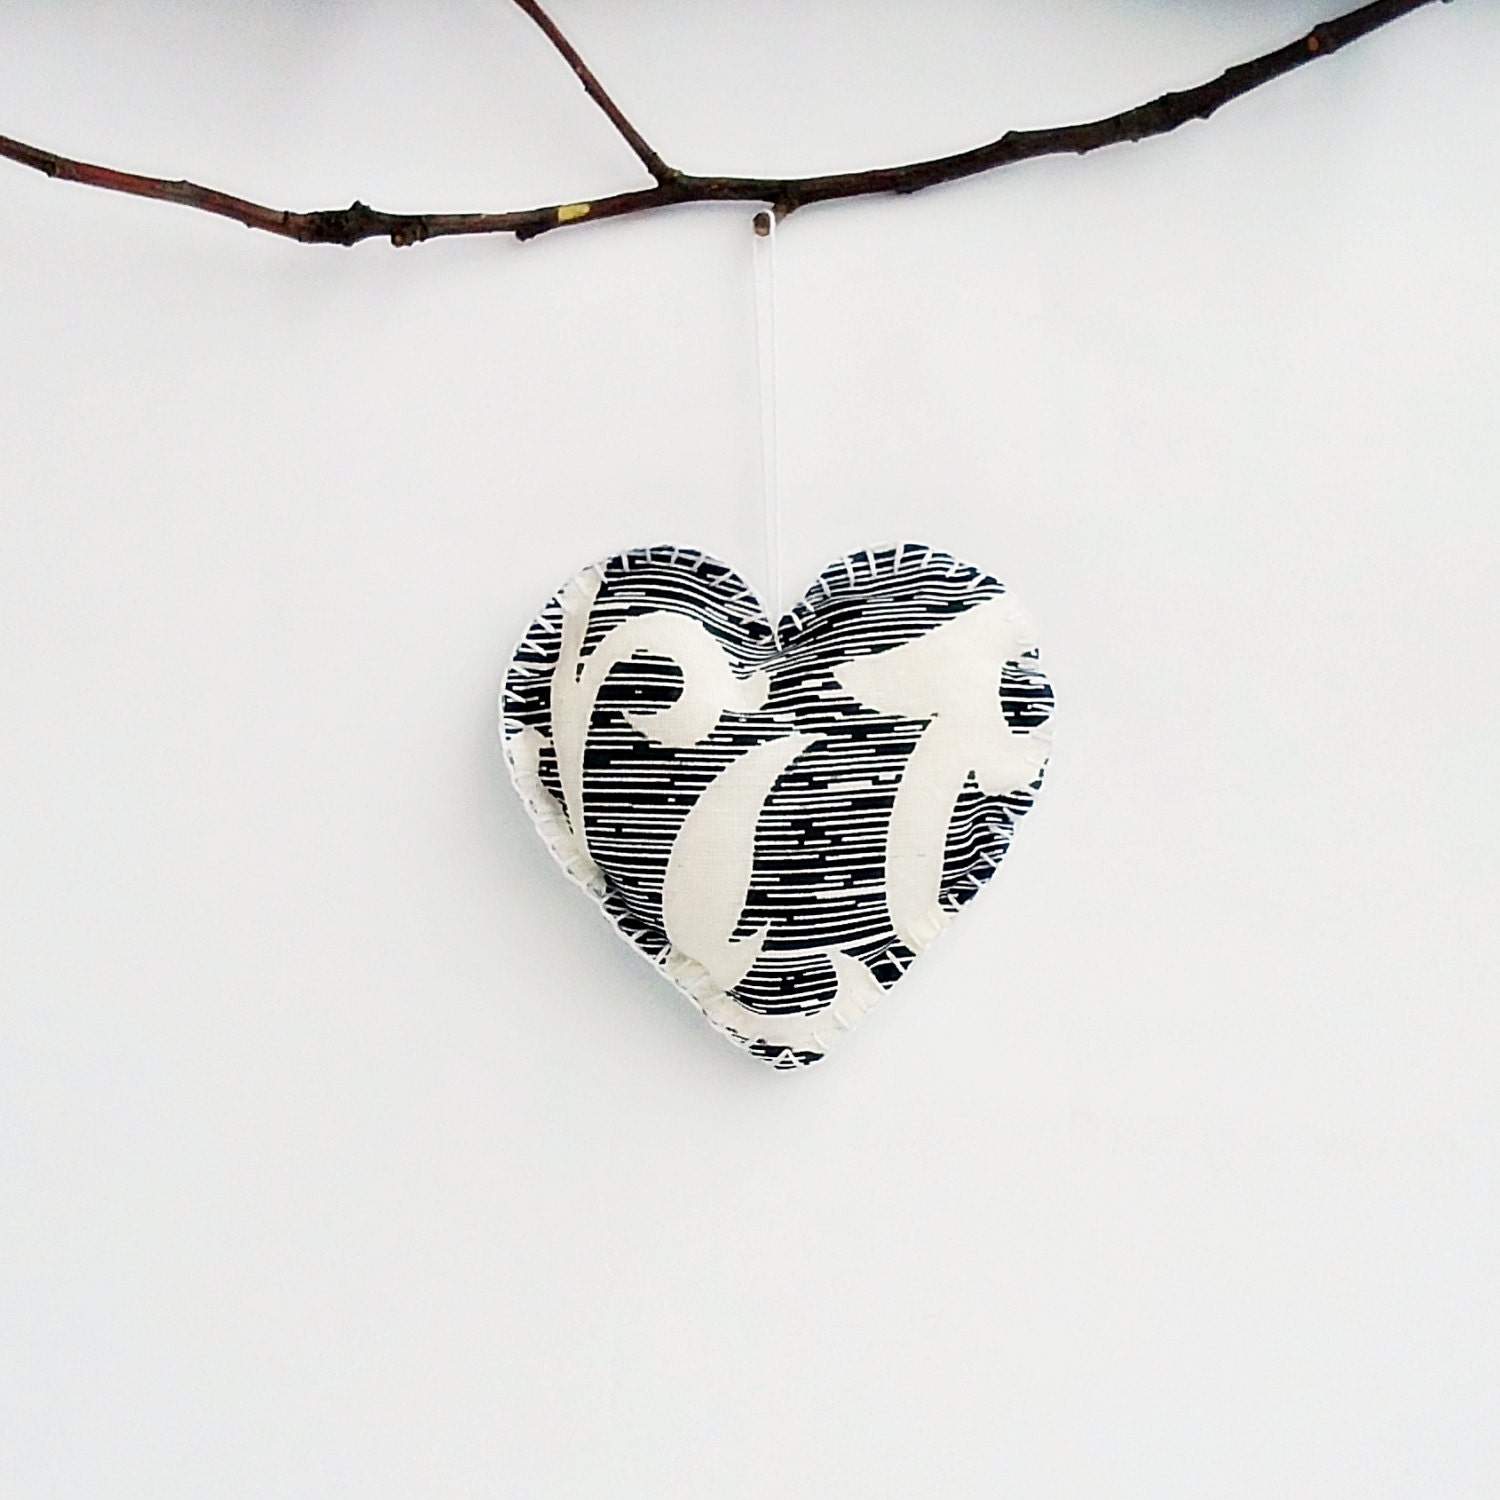 Valentine's Day Large Hanging Fabric Love Heart in Black, White and Ecru, Hearts Ornament, Valentine's Day Ornament